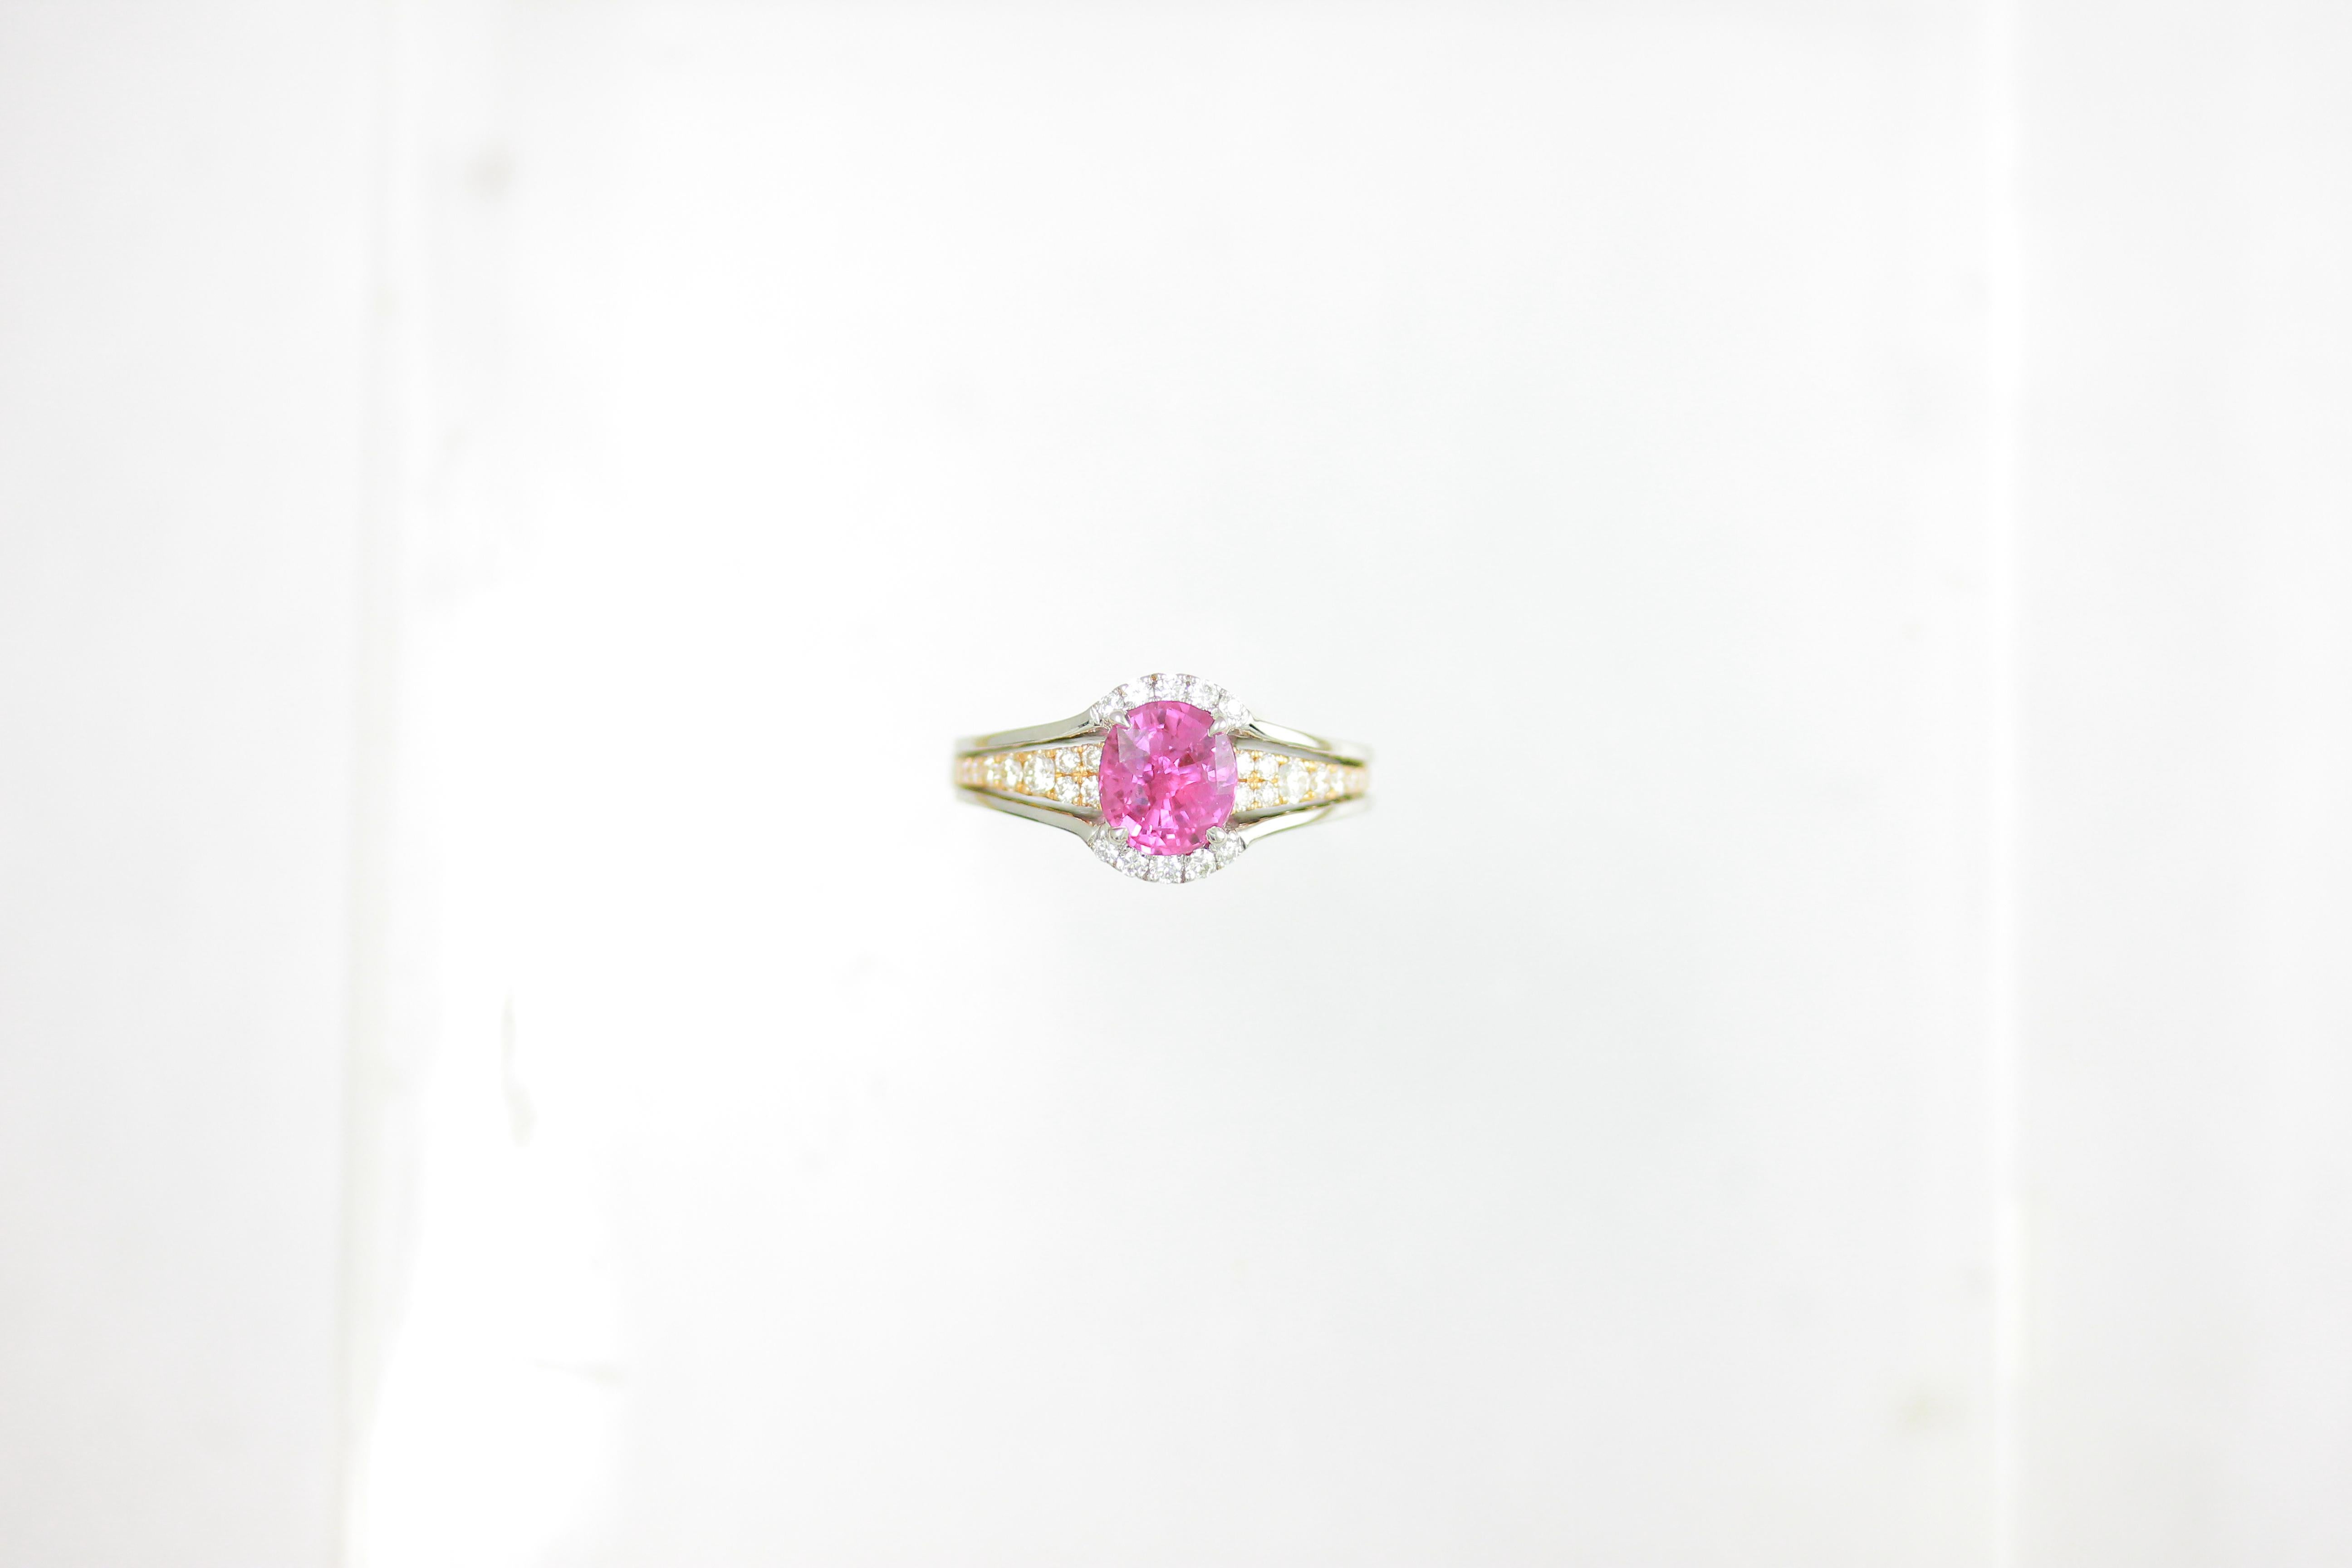 Oval Cut Frederic Sage 1.93 Carat Pink Sapphire Diamond Engagement Bridal Cocktail Ring For Sale